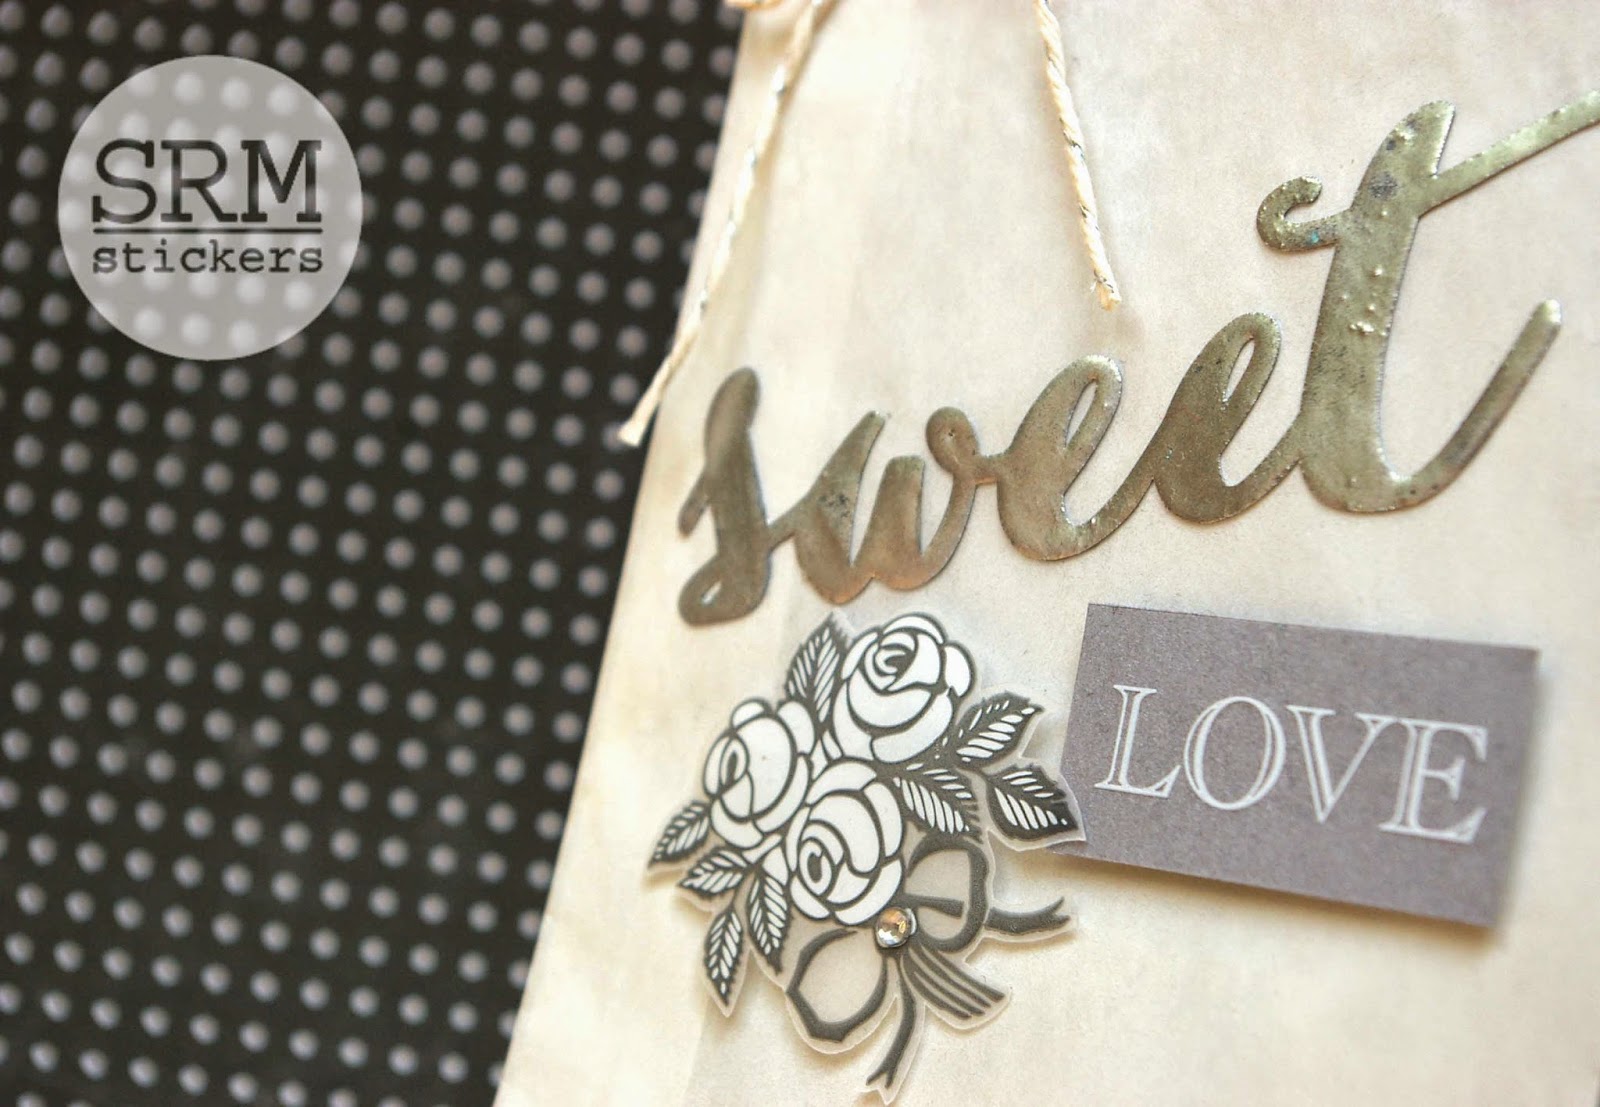 SRM Stickers Blog - Sweet Love Wedding Gift by Lorena - #glassinebag #shimmertwine #twine #stickers